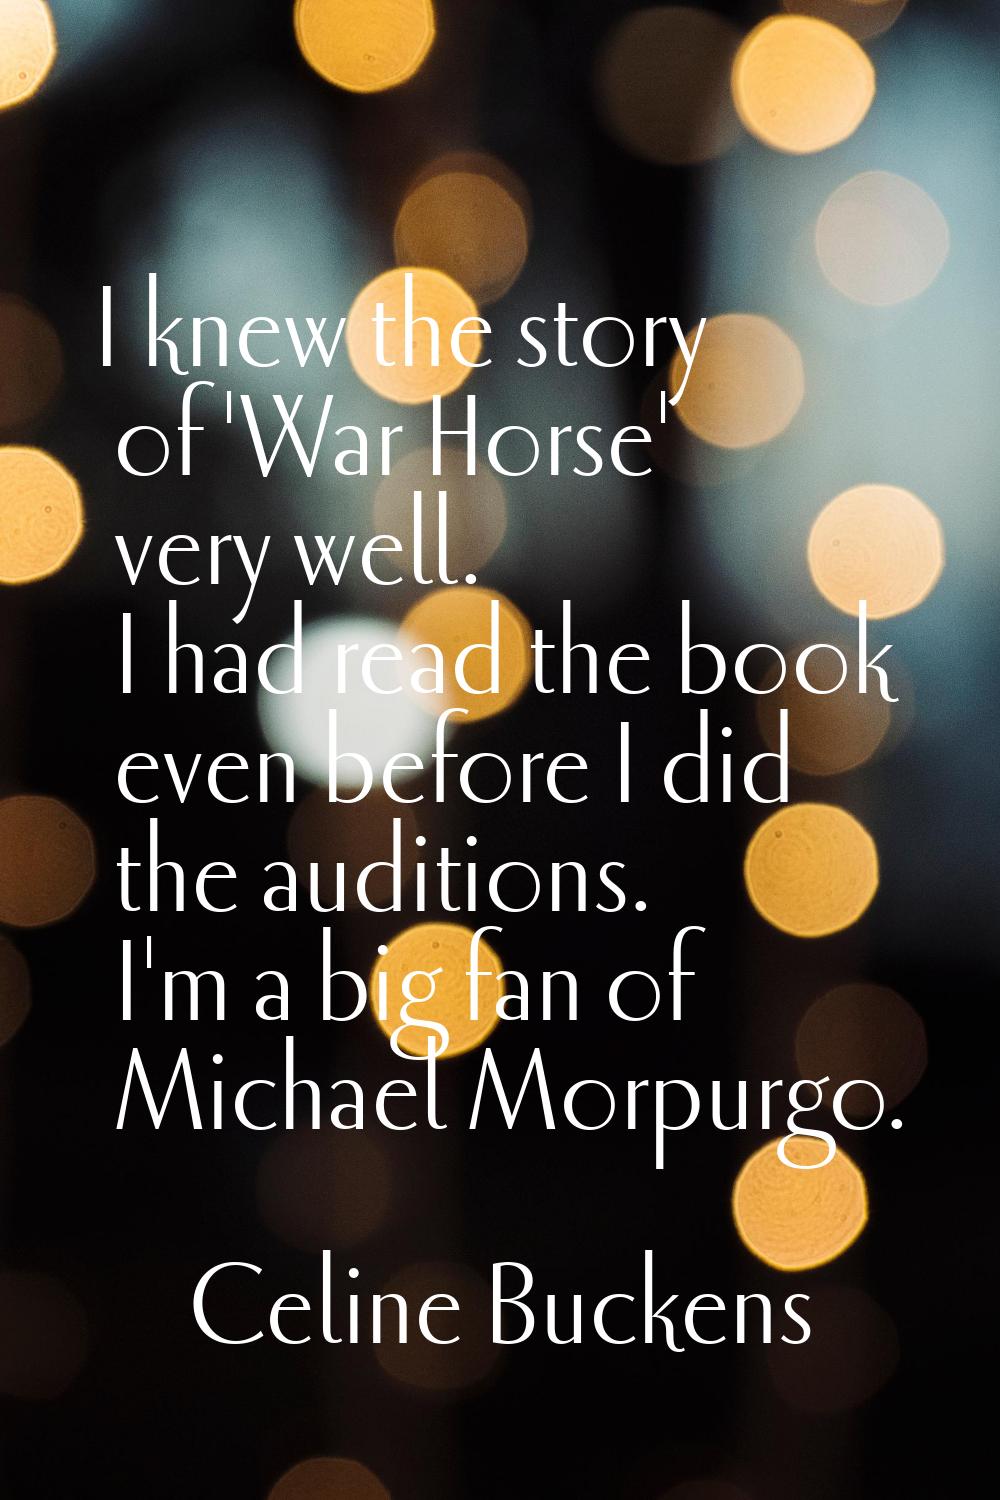 I knew the story of 'War Horse' very well. I had read the book even before I did the auditions. I'm